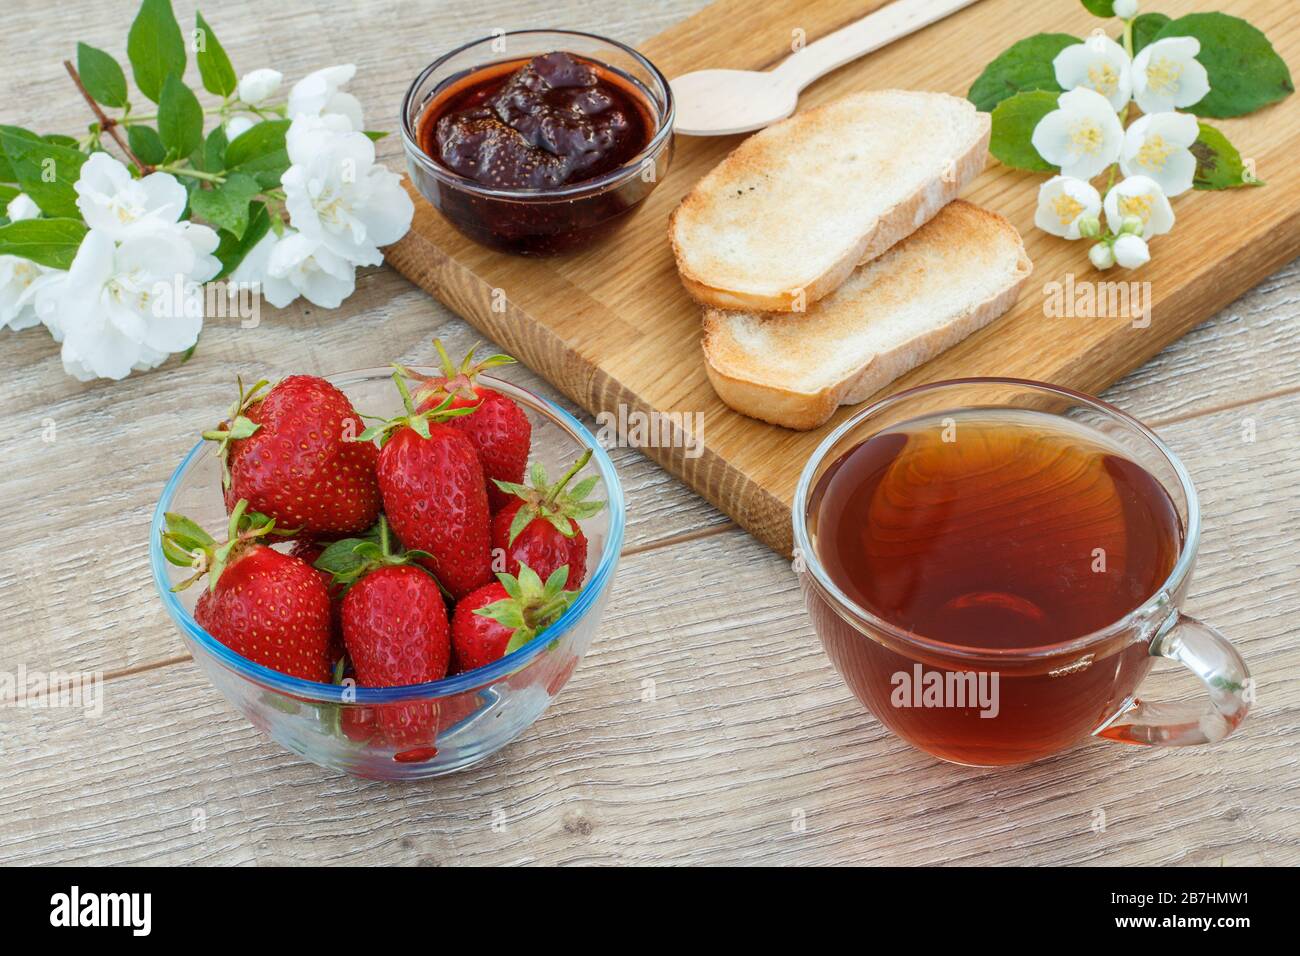 https://c8.alamy.com/comp/2B7HMW1/glass-cup-of-tea-homemade-strawberry-jam-bread-on-wooden-cutting-board-and-fresh-strawberries-spoon-and-white-jasmine-flowers-on-wooden-background-2B7HMW1.jpg